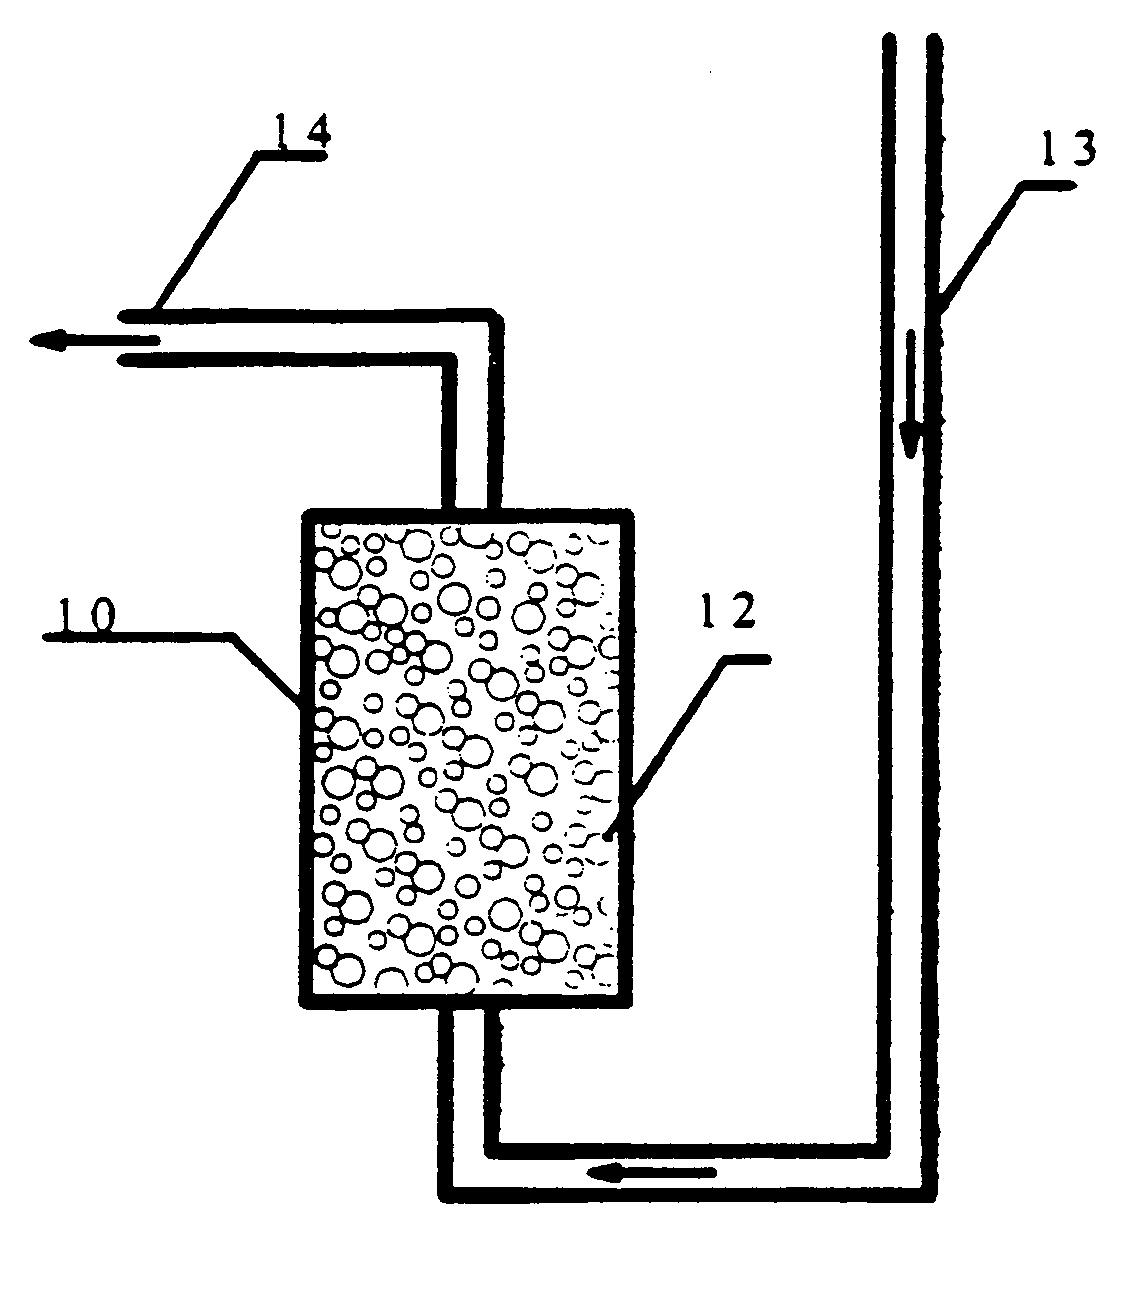 Clarification and sorptive-filtration system for the capture of constituents and particulate matter in liquids and gases